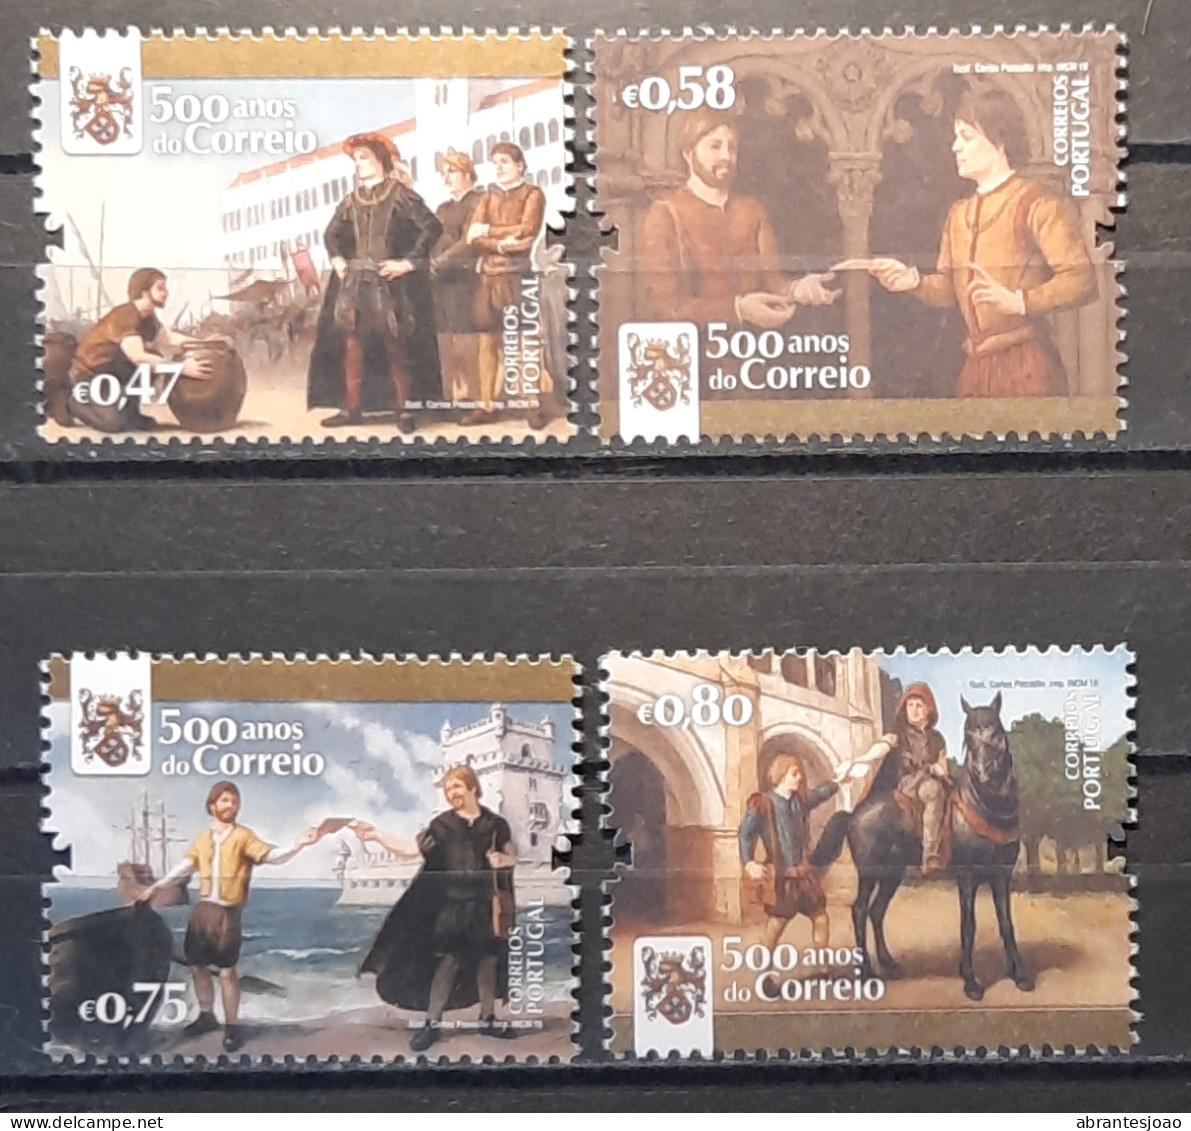 2016 - Portugal - MNH - 500 Years Of Mail In Portugal - 1st Group - 4 Stamps + Souvenir Sheet Of 1 Stamp - Ungebraucht